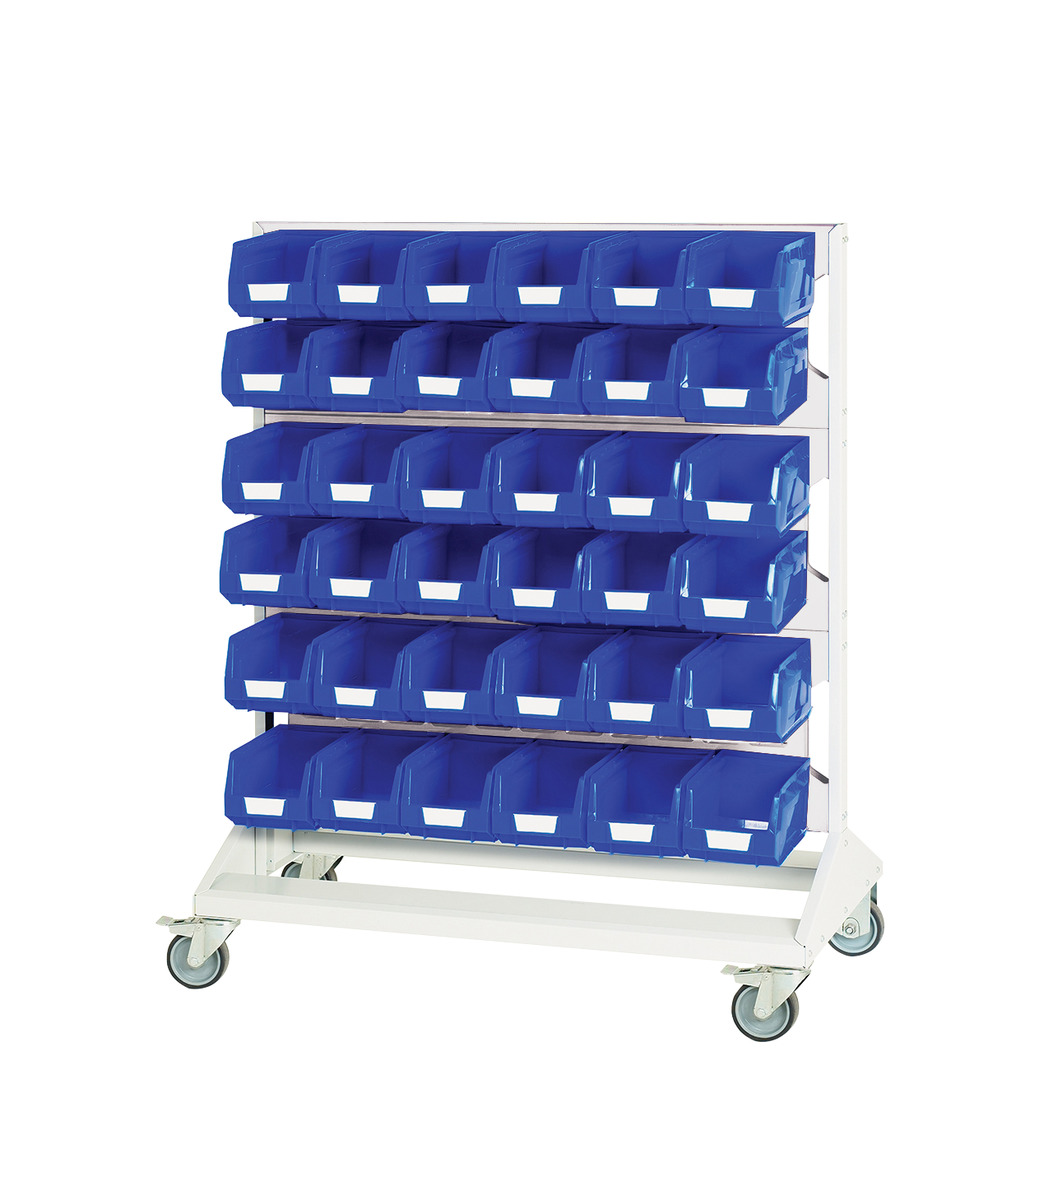 16917272.16V - Louvre panel trolley double sided & bins